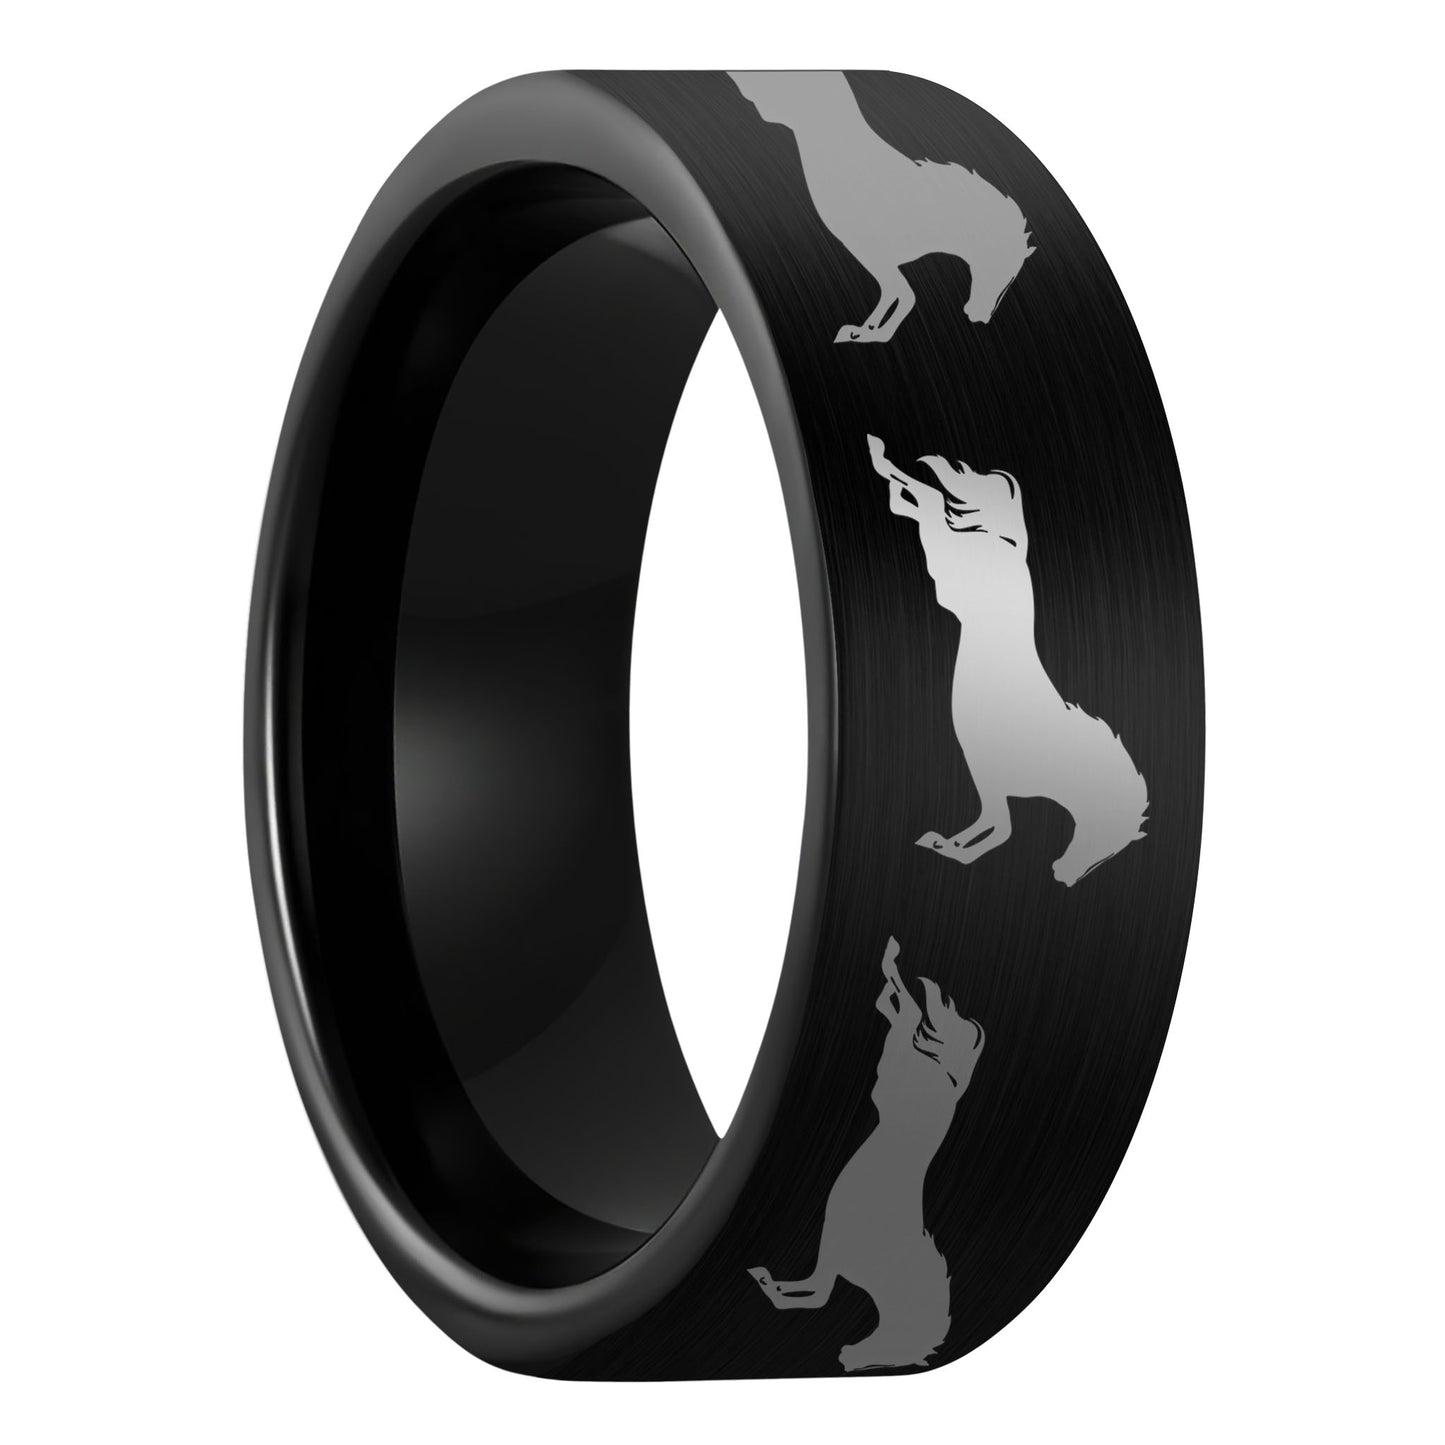 A galloping horses brushed black tungsten men's wedding band displayed on a plain white background.